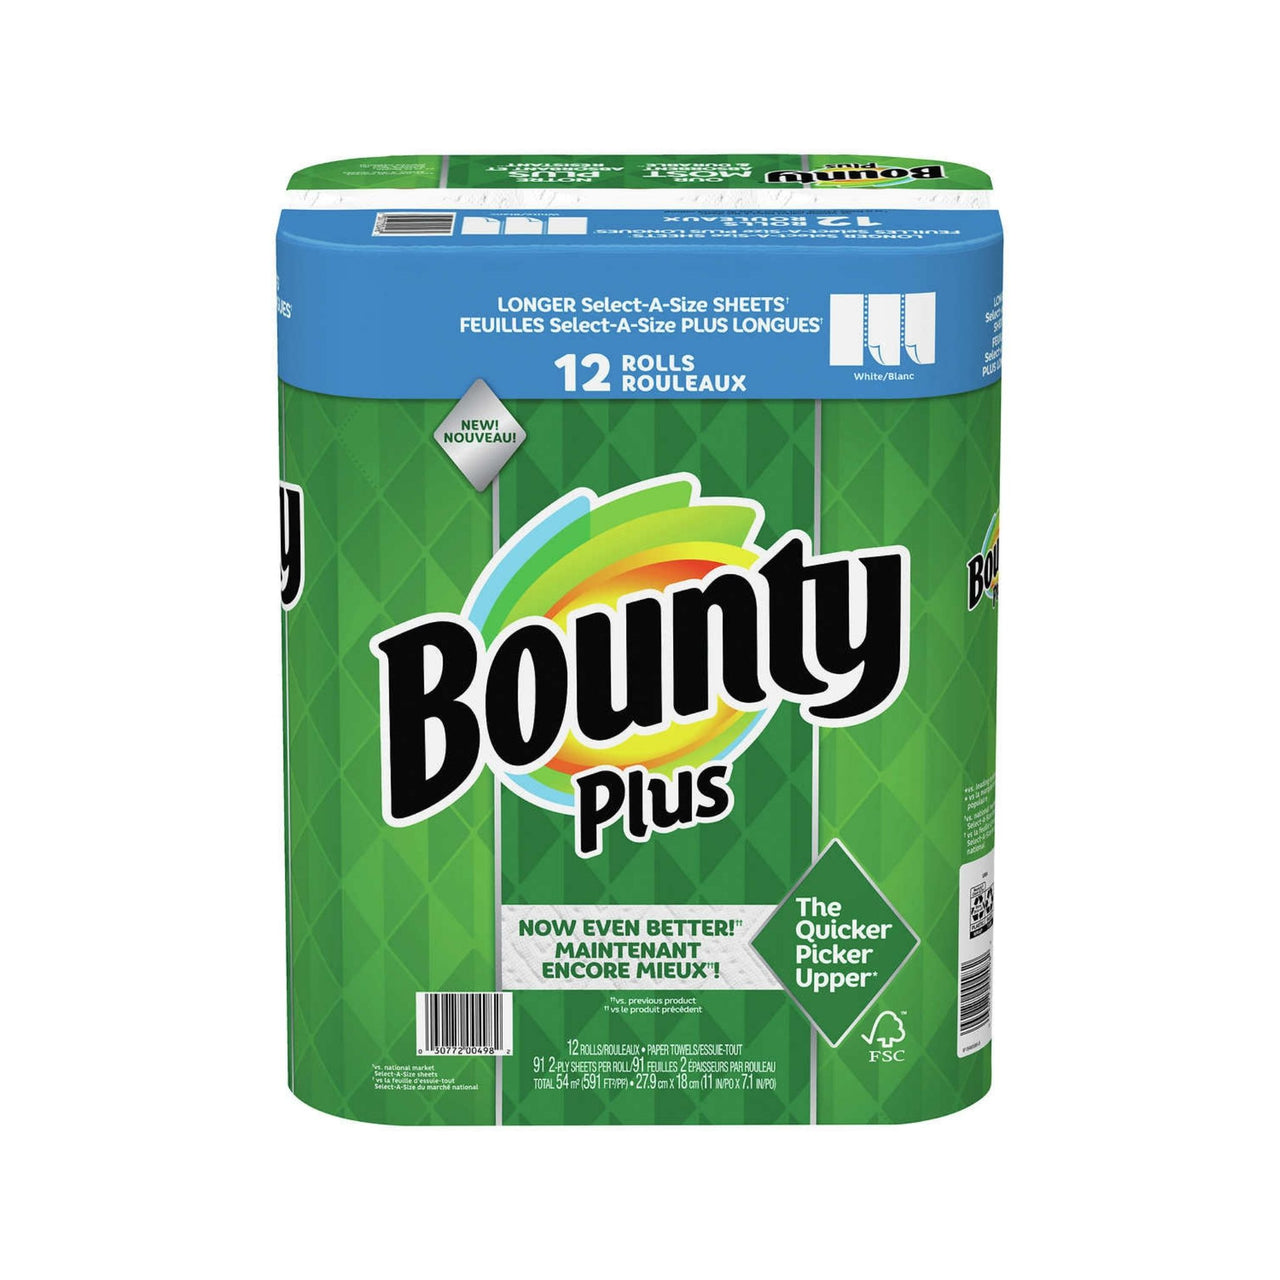 Image of Bounty Plus Select-A-Size Paper Towels, 12 x 86 sheets